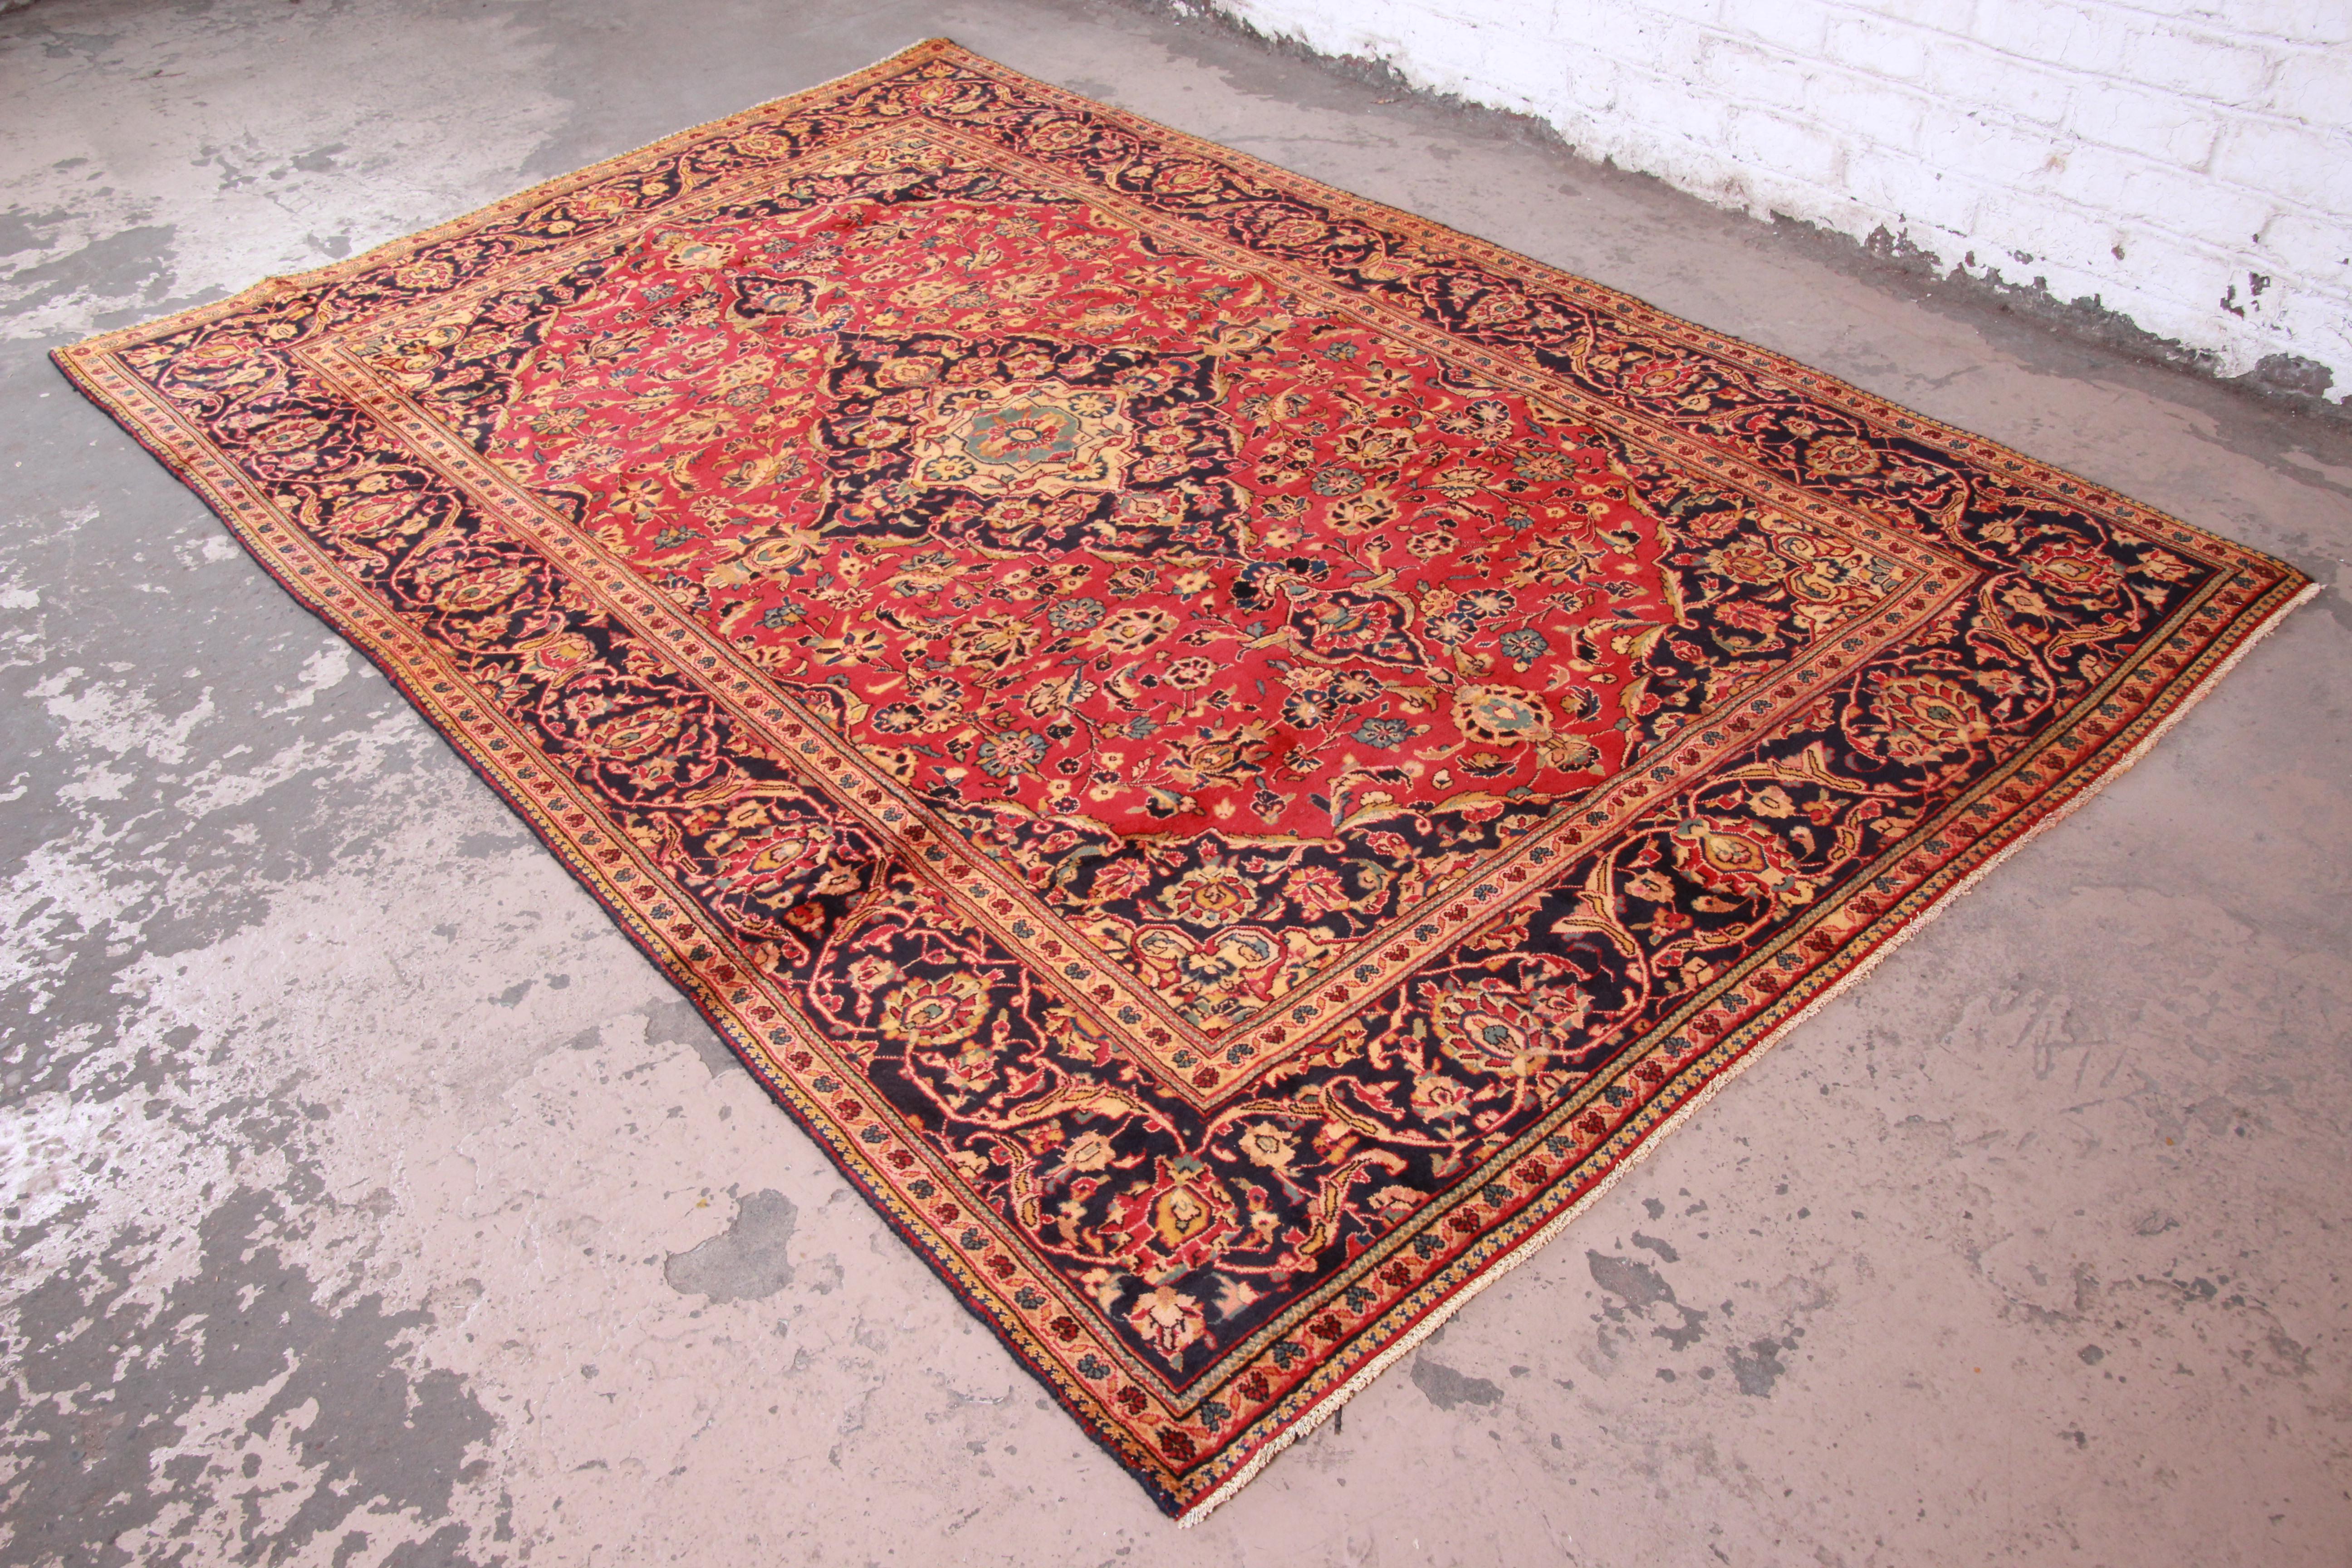 A gorgeous vintage handwoven Persian wool rug. The rug has a 100% wool pile and a beautiful floral pattern with predominant colors in red, blue, and gold. The rug is clean and in very good condition. Ready for immediate use.

The rug measures 77